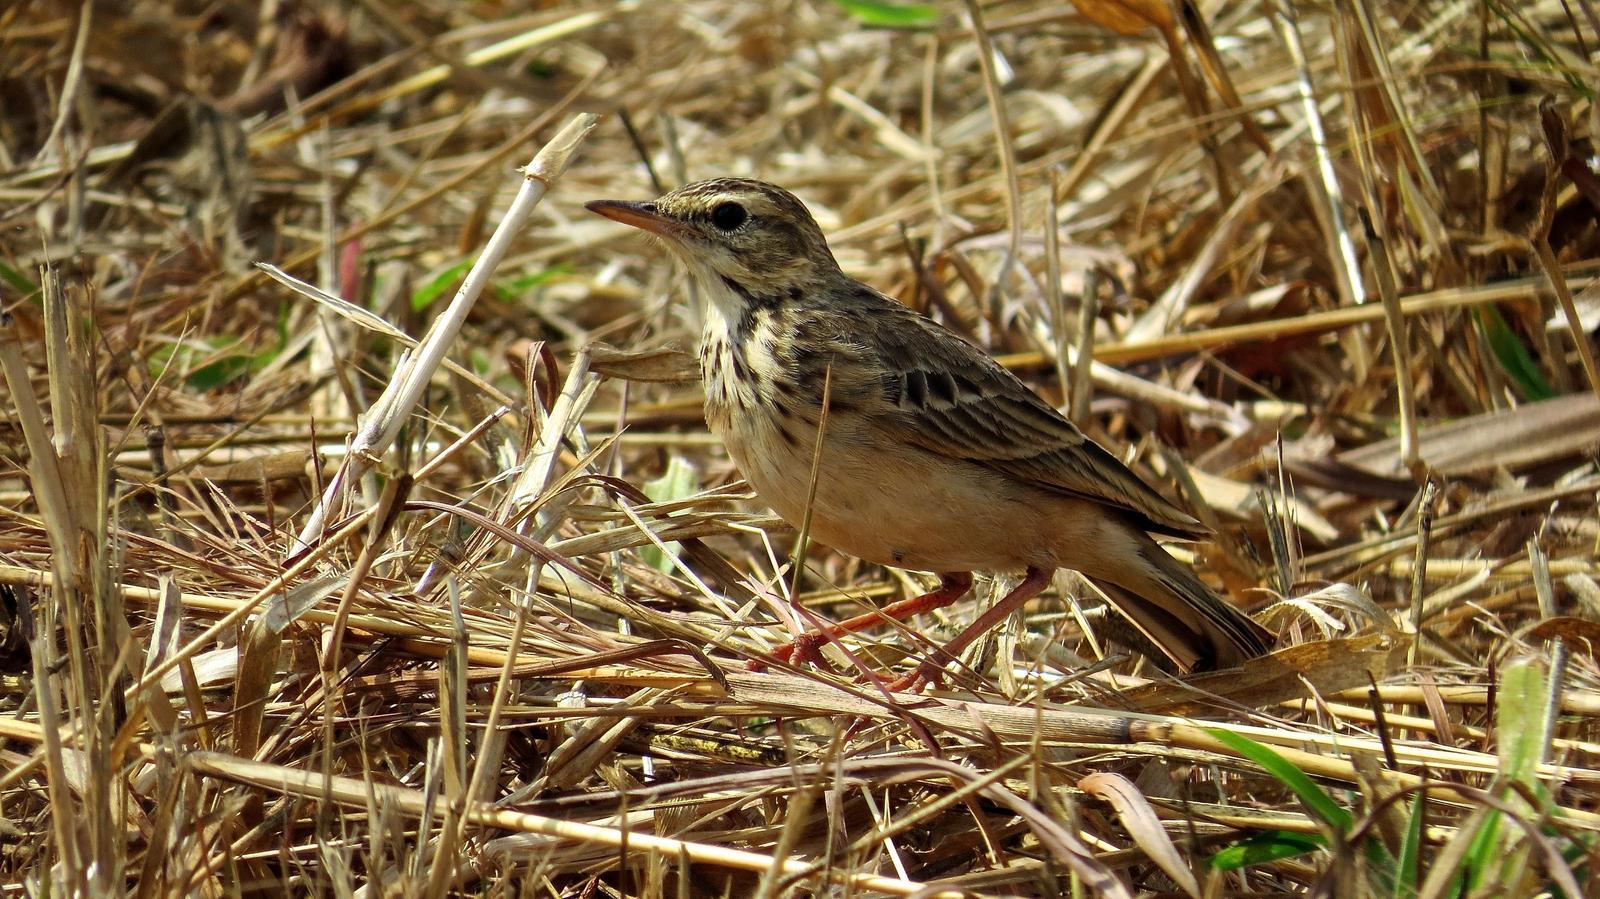 African Pipit Photo by Ken Pinnow